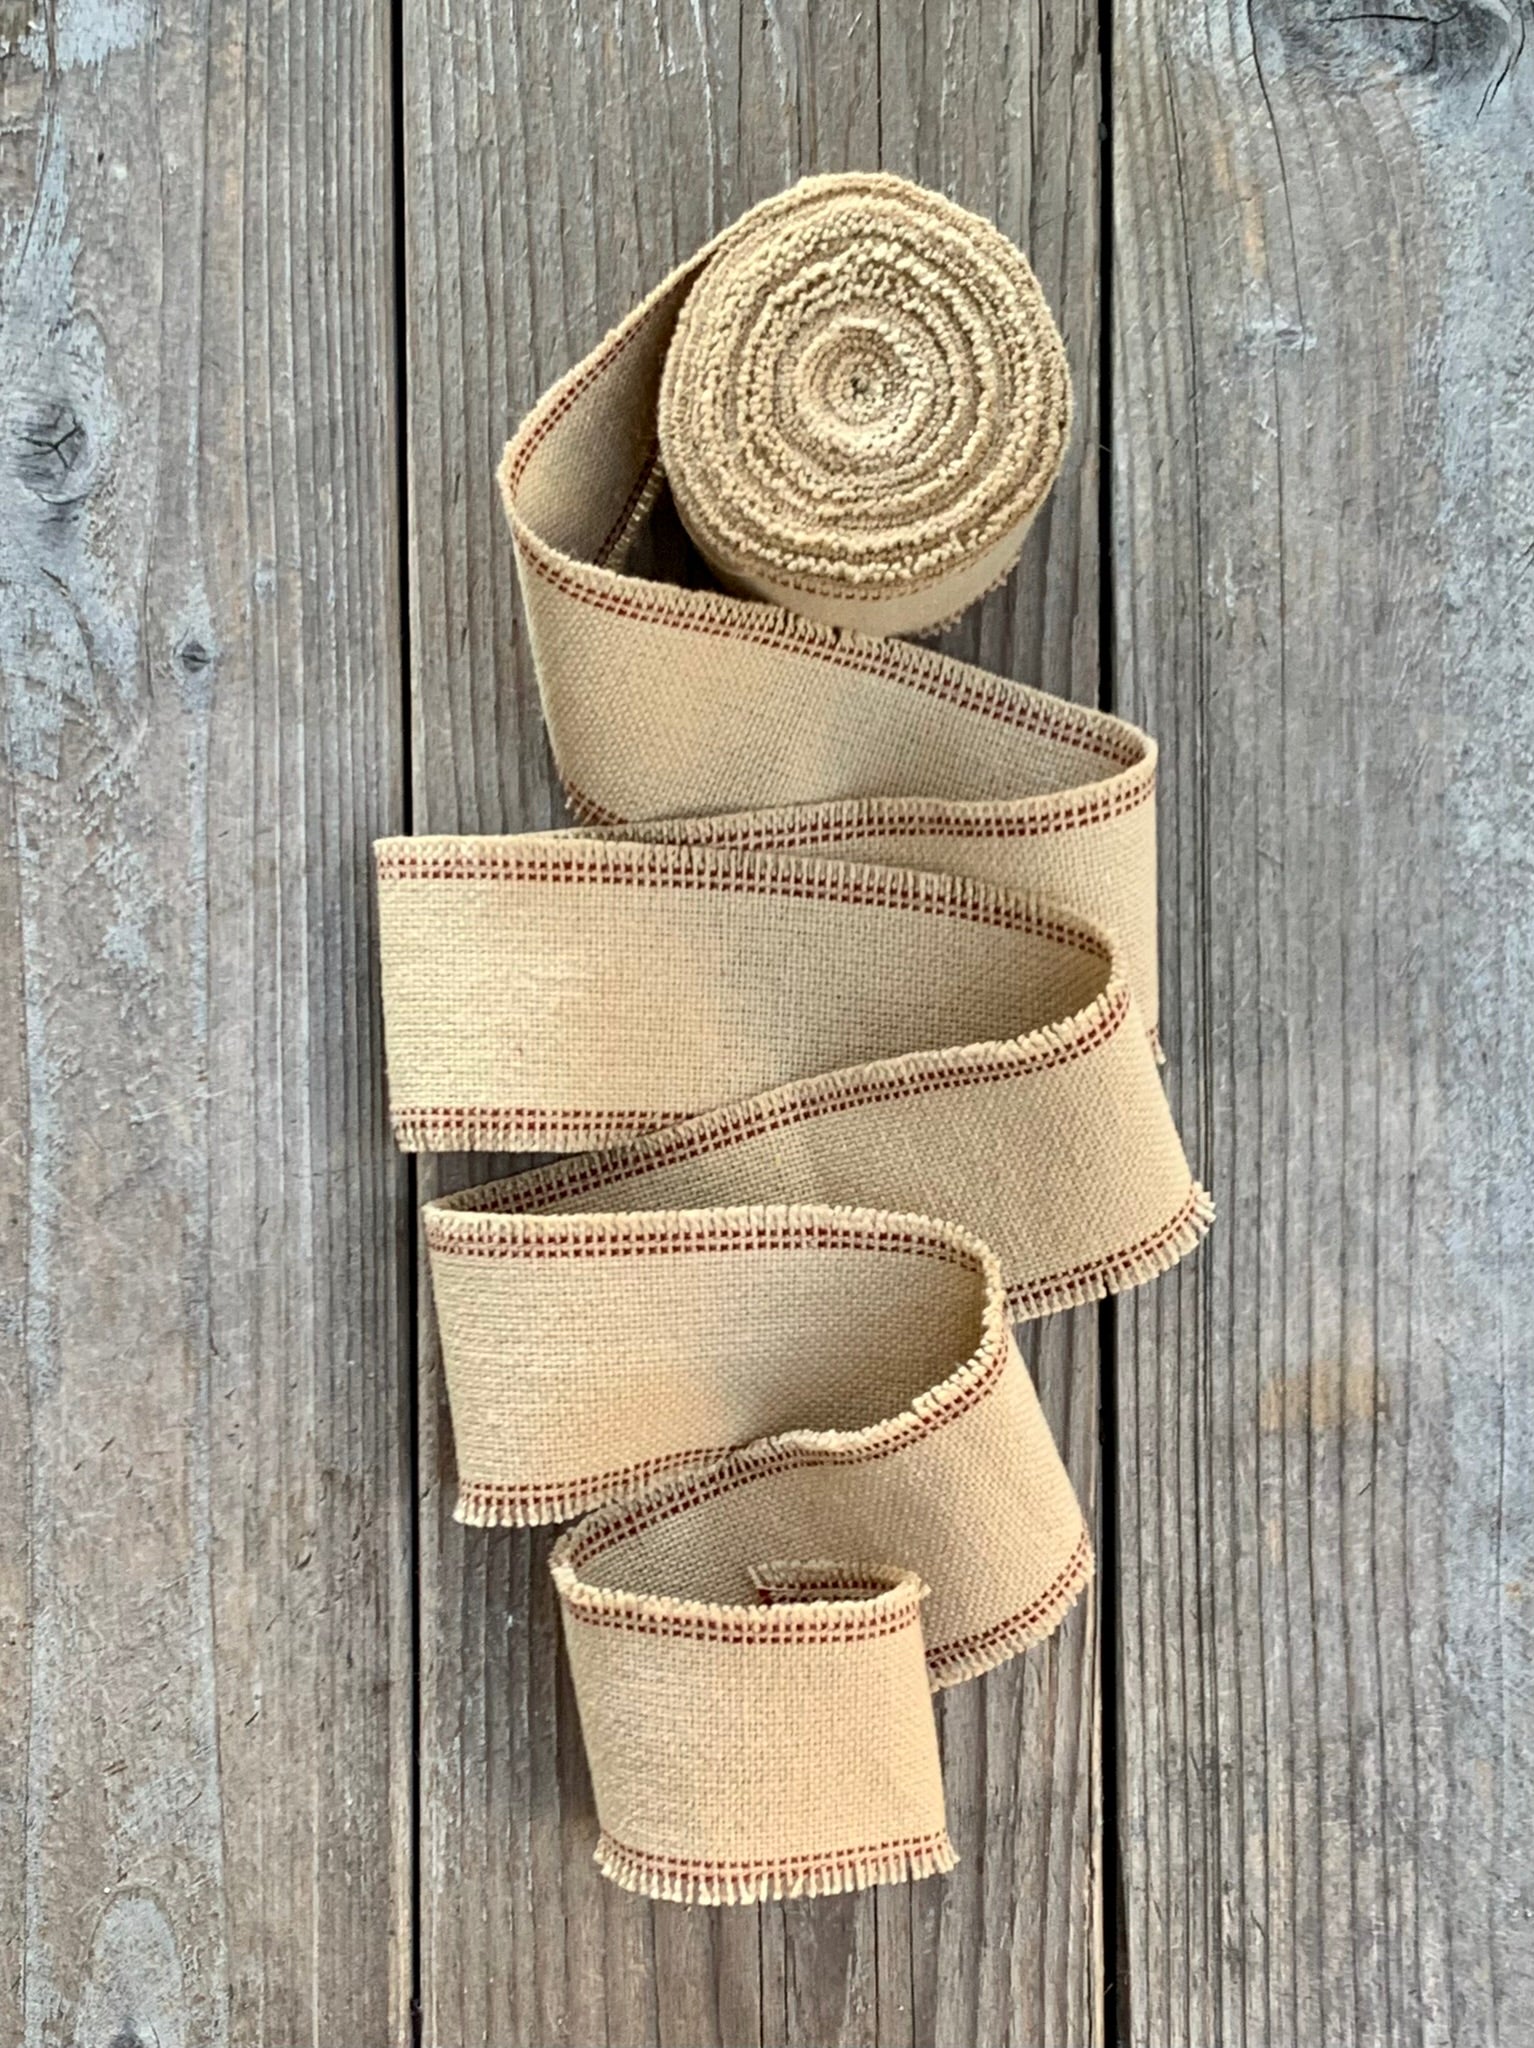 Grain Sack Ribbon - Red and Beige Frayed Edge - 2 1/4 Wide